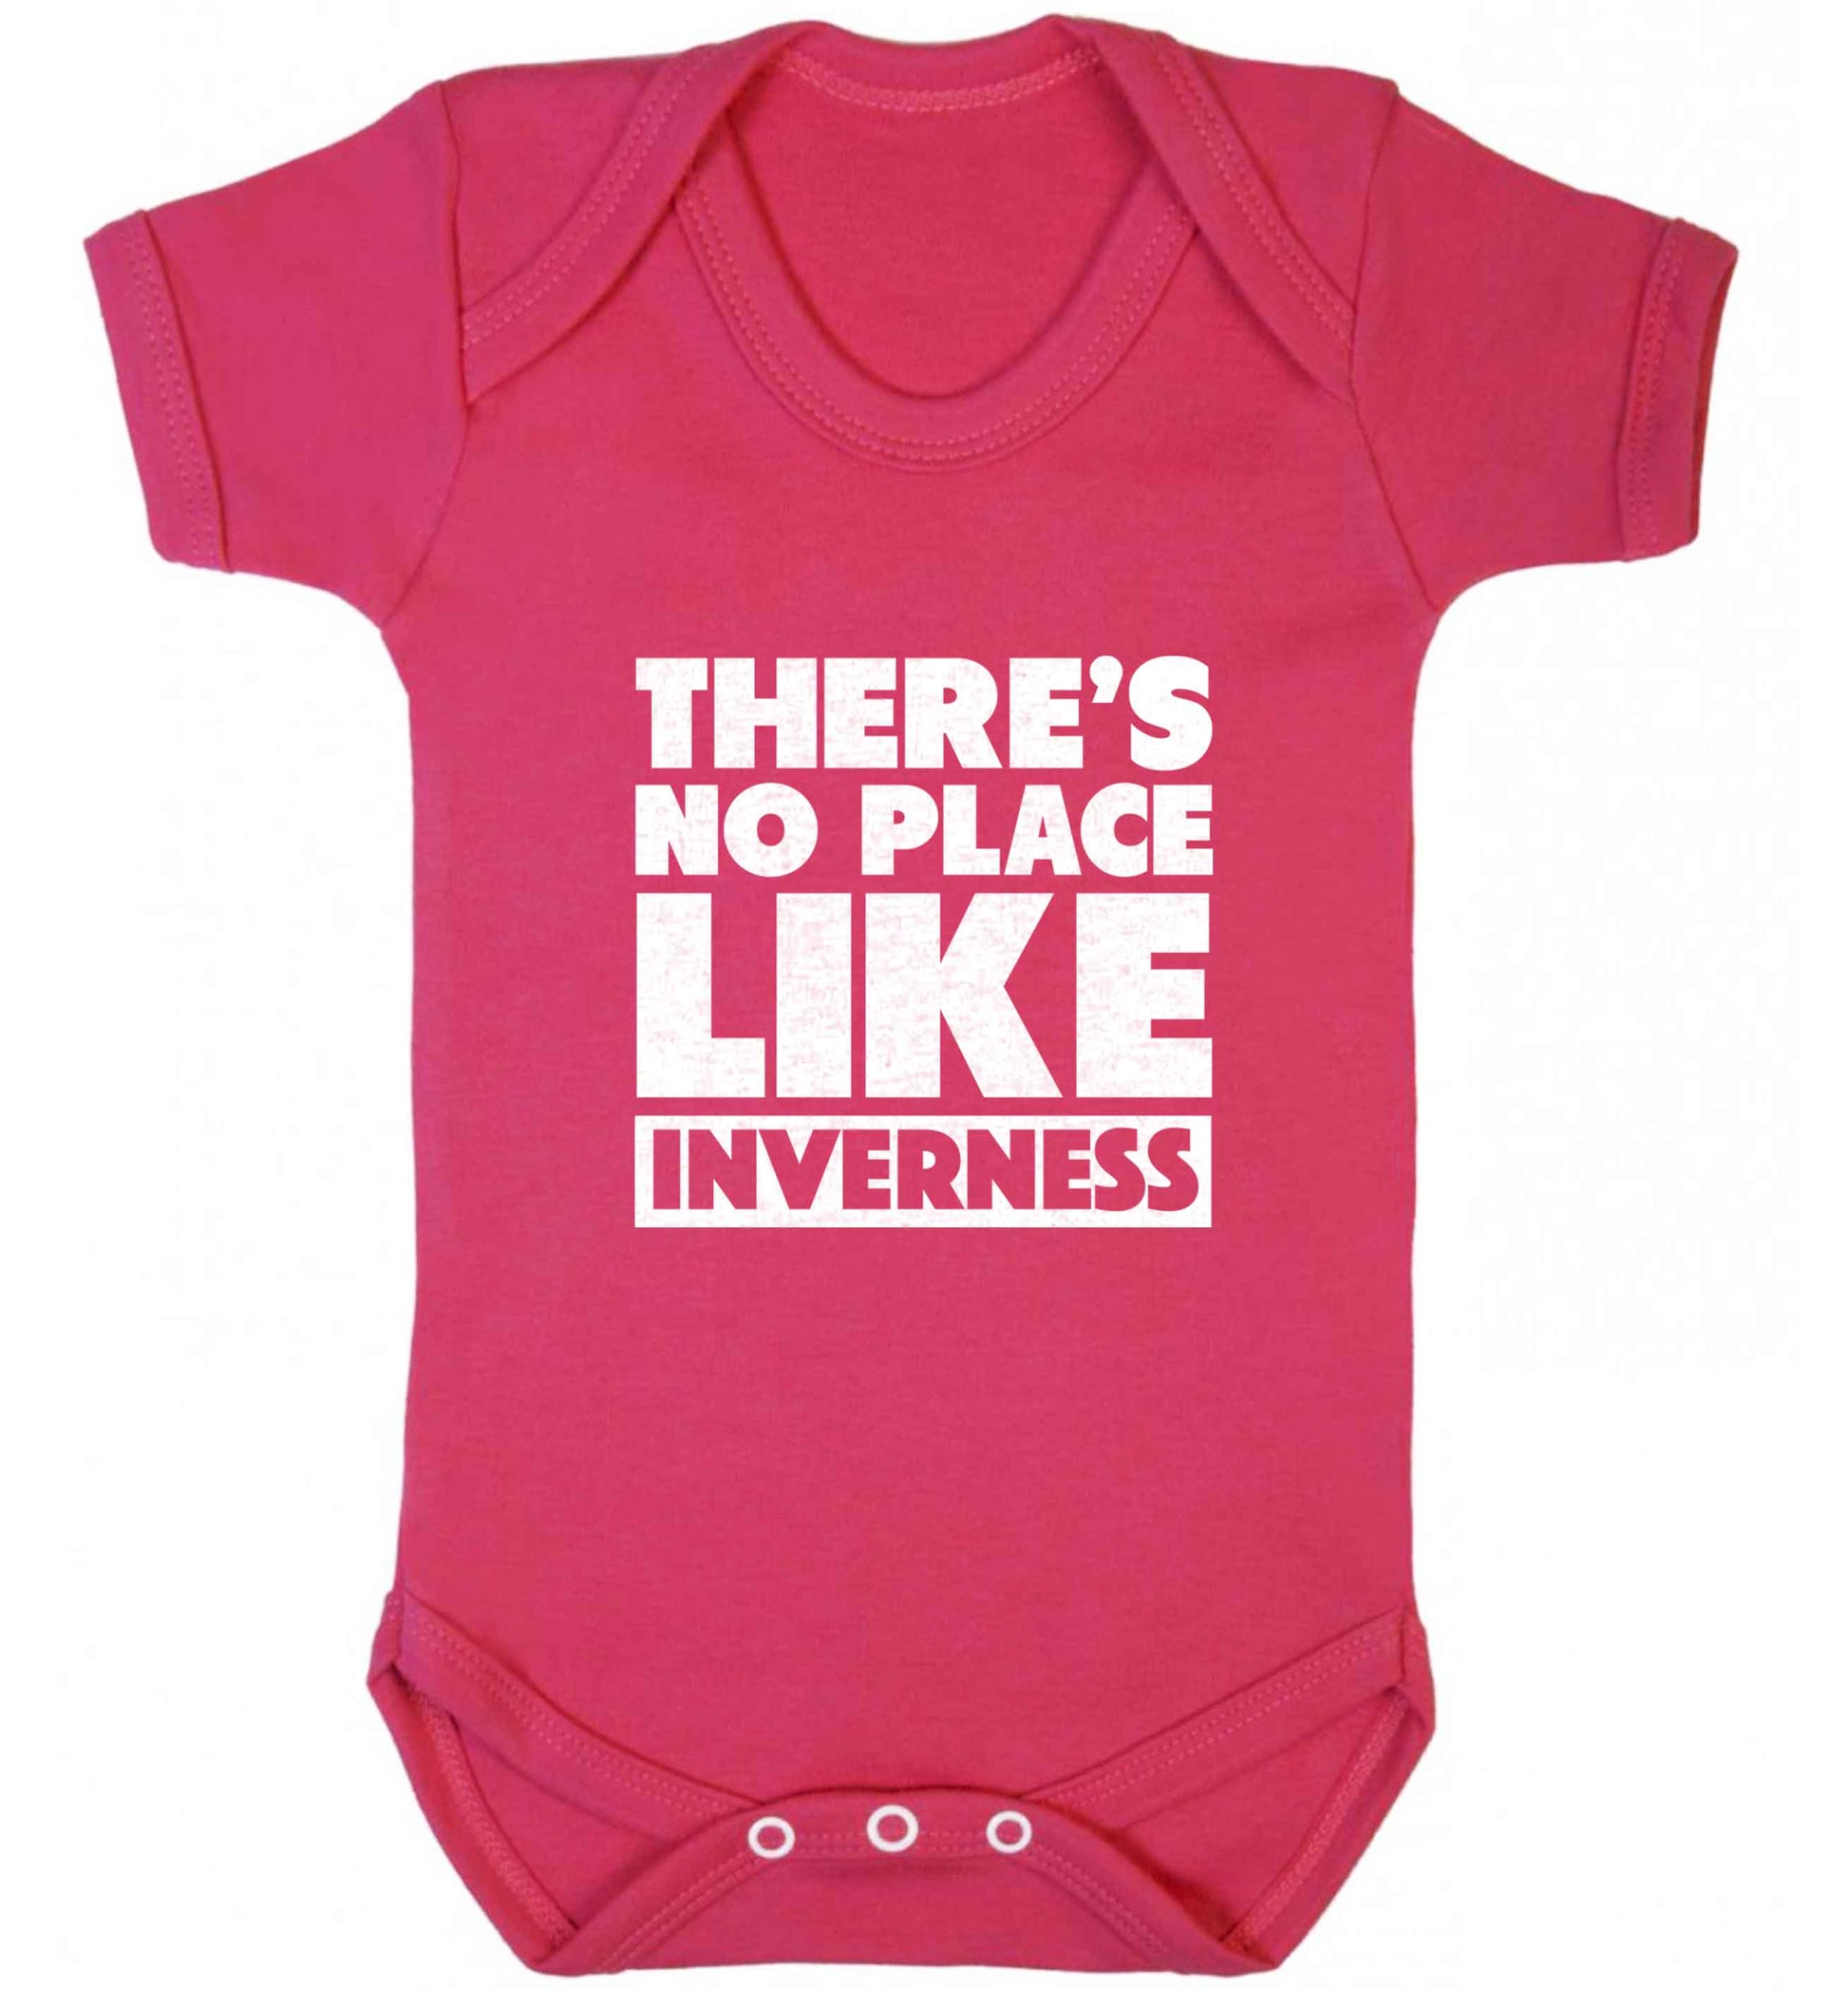 There's no place like Inverness baby vest dark pink 18-24 months